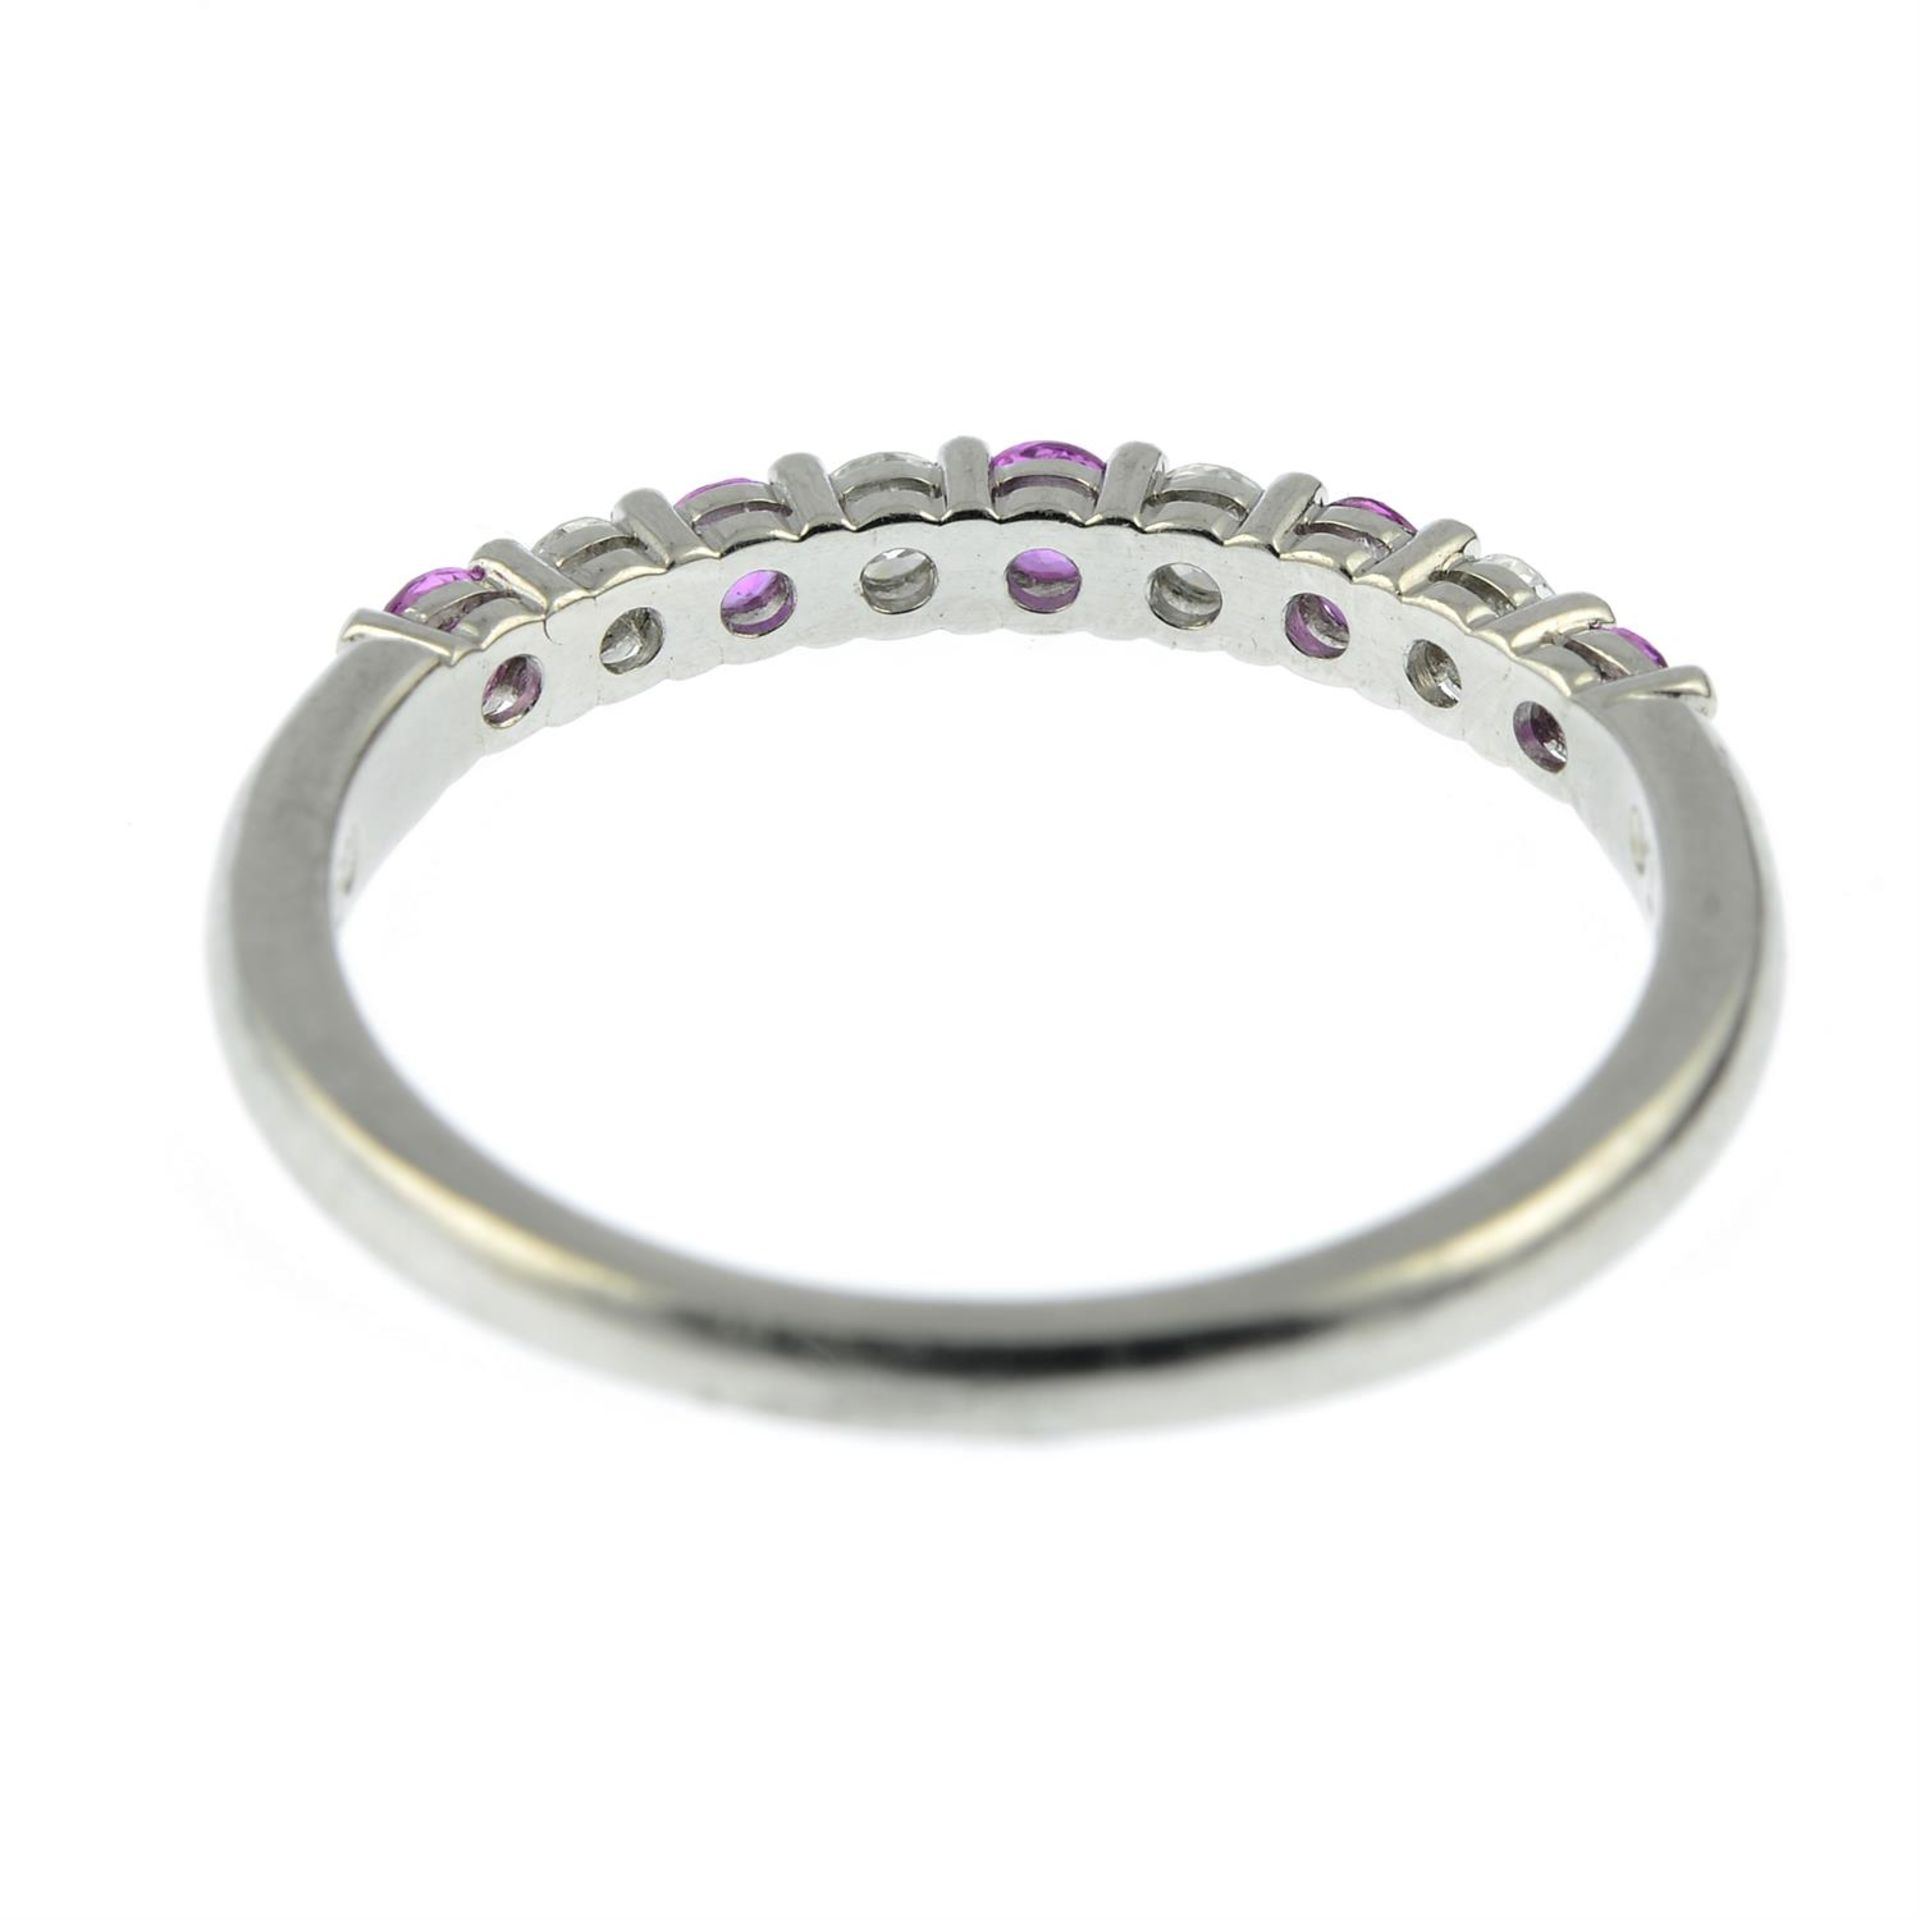 A platinum pink sapphire and brilliant-cut diamond band ring, by Tiffany & Co. - Image 3 of 6